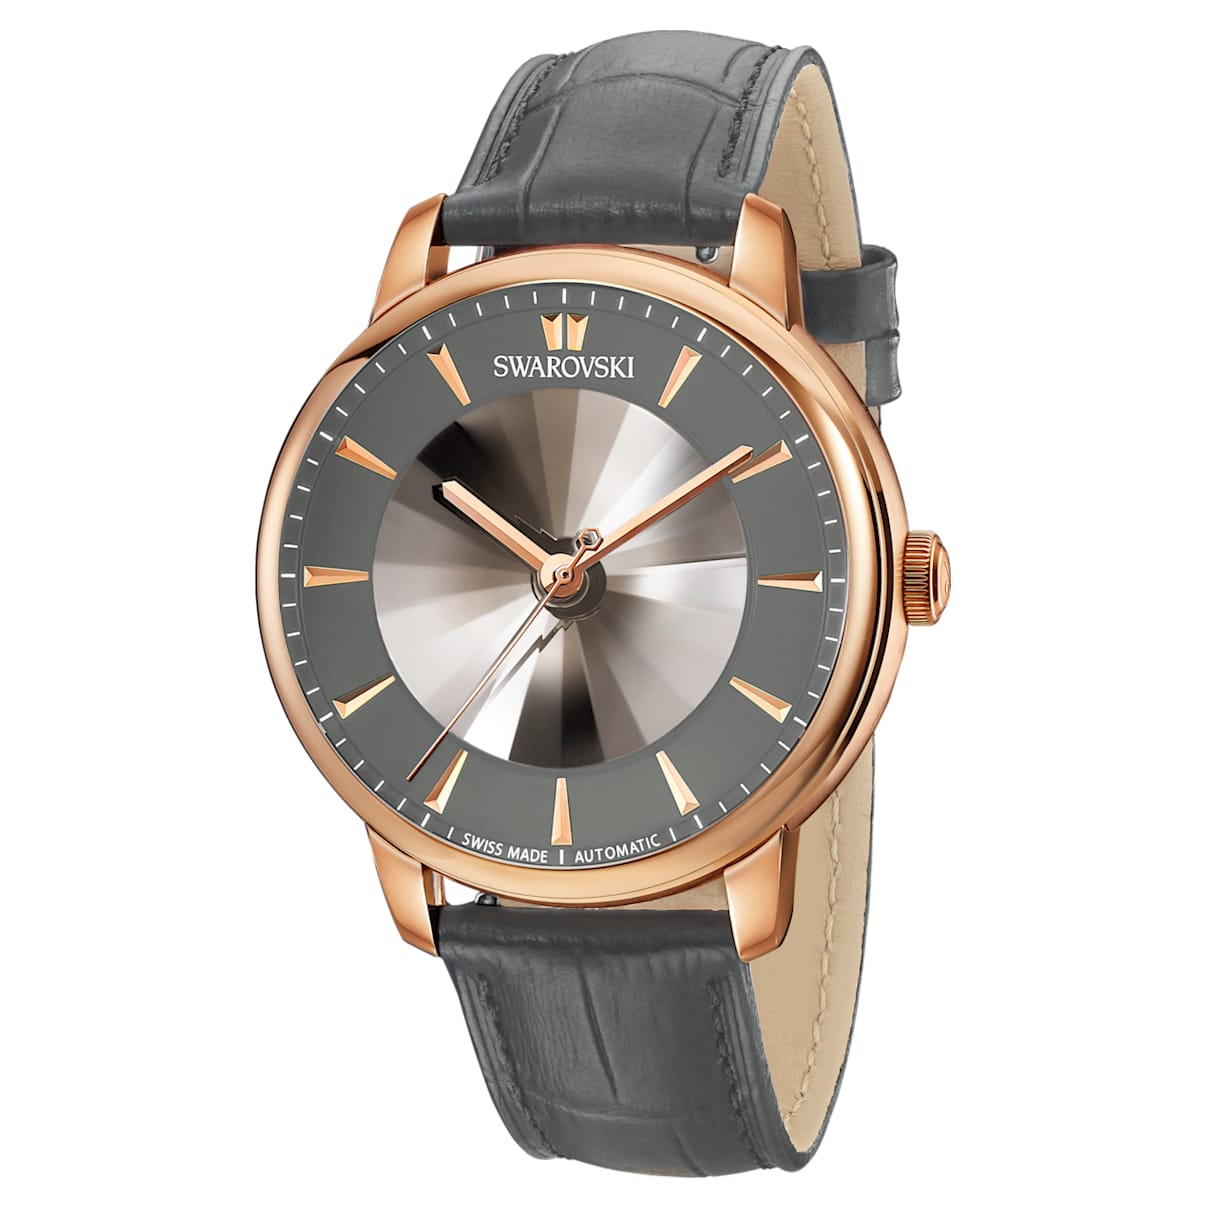 Atlantis Limited Edition Automatic Men's Watch, Leather strap, Gray, Rose-gold tone PVD